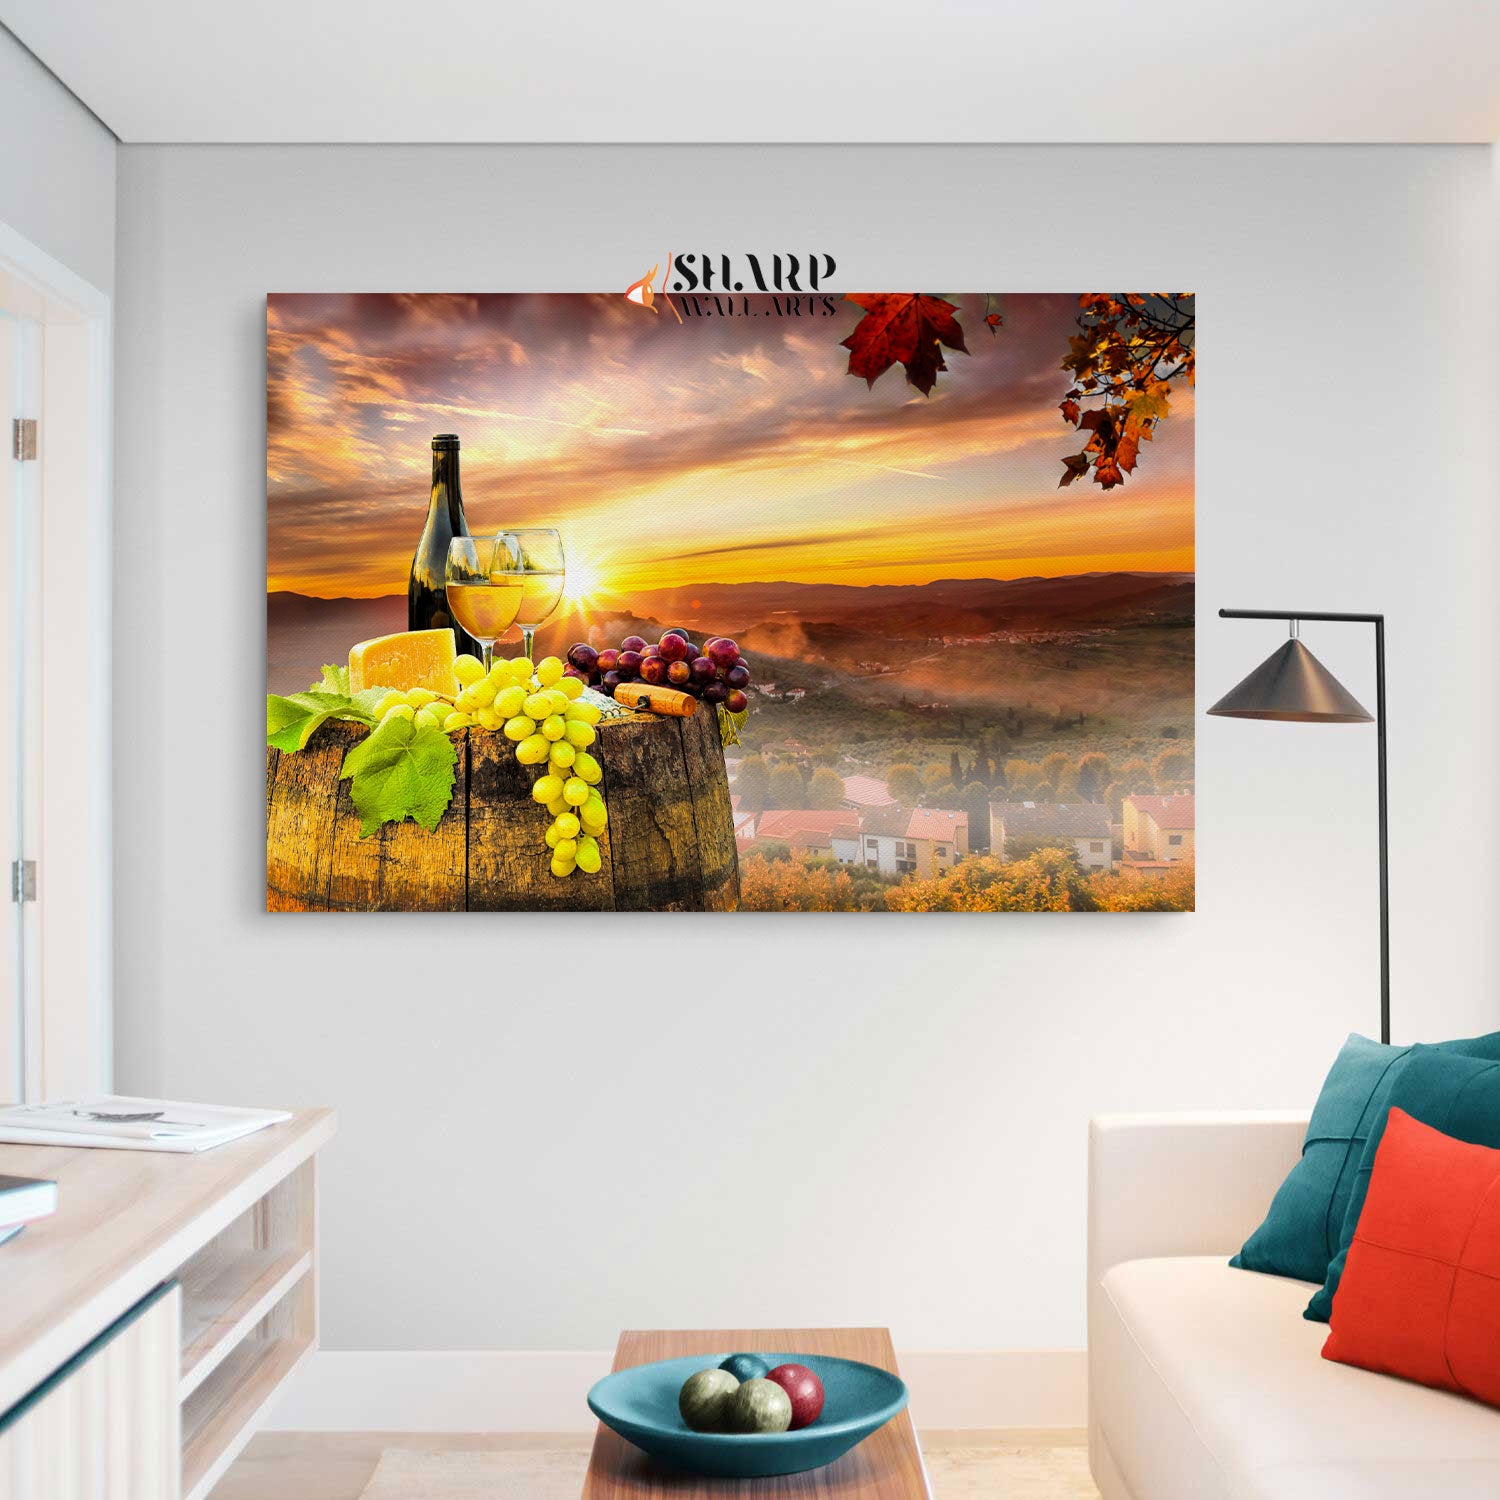 Wine Country Wall Art Canvas